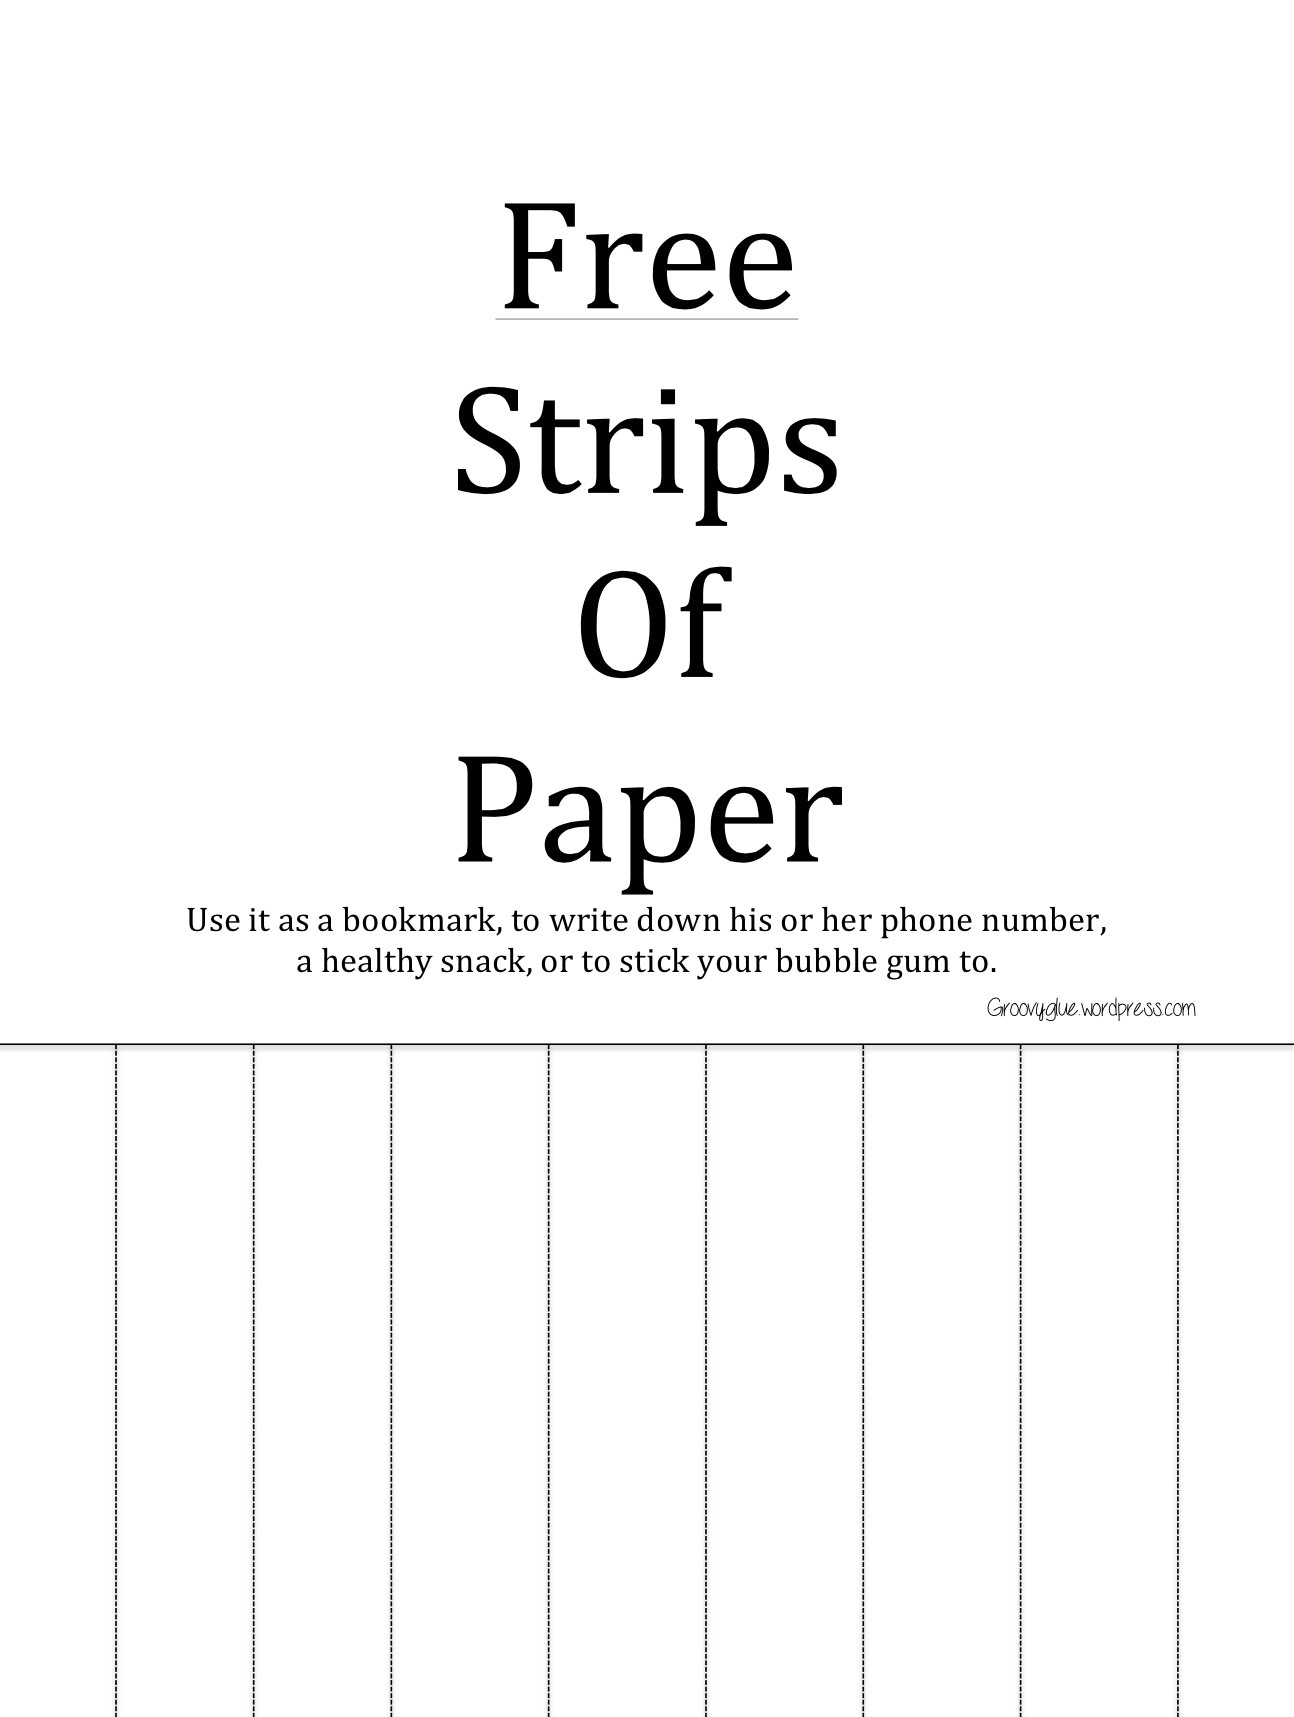 Free Strips of Paper Printable